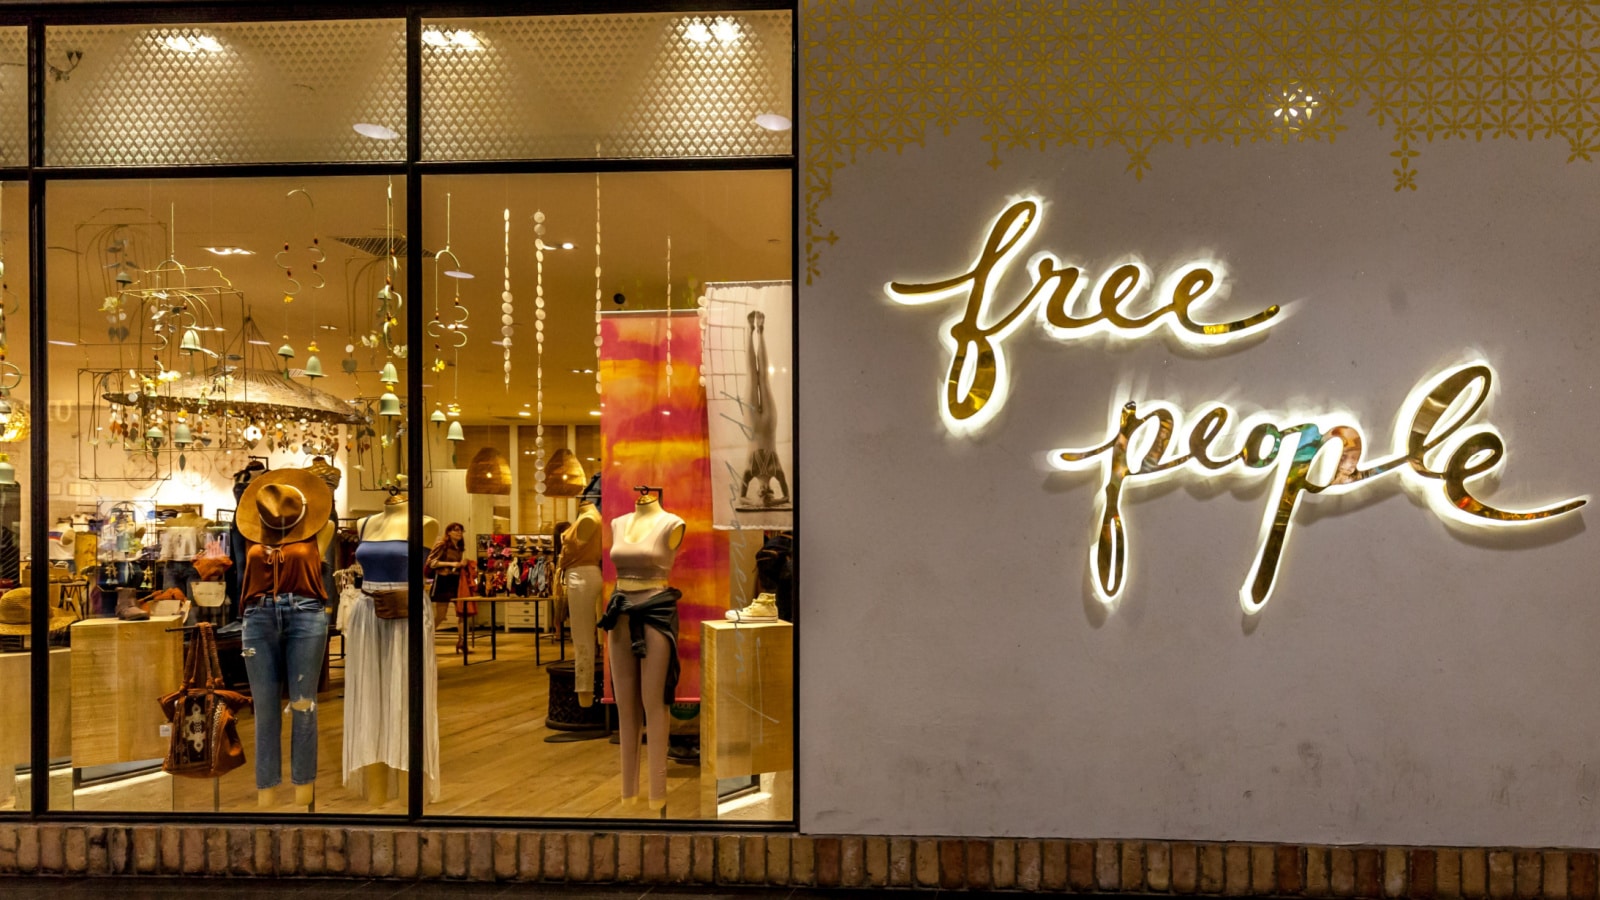 Toronto, Canada - May 5, 2018: Free People store front in the Eaton Centre shopping mall in Toronto. Free People is an American bohemian apparel and lifestyle retail company.